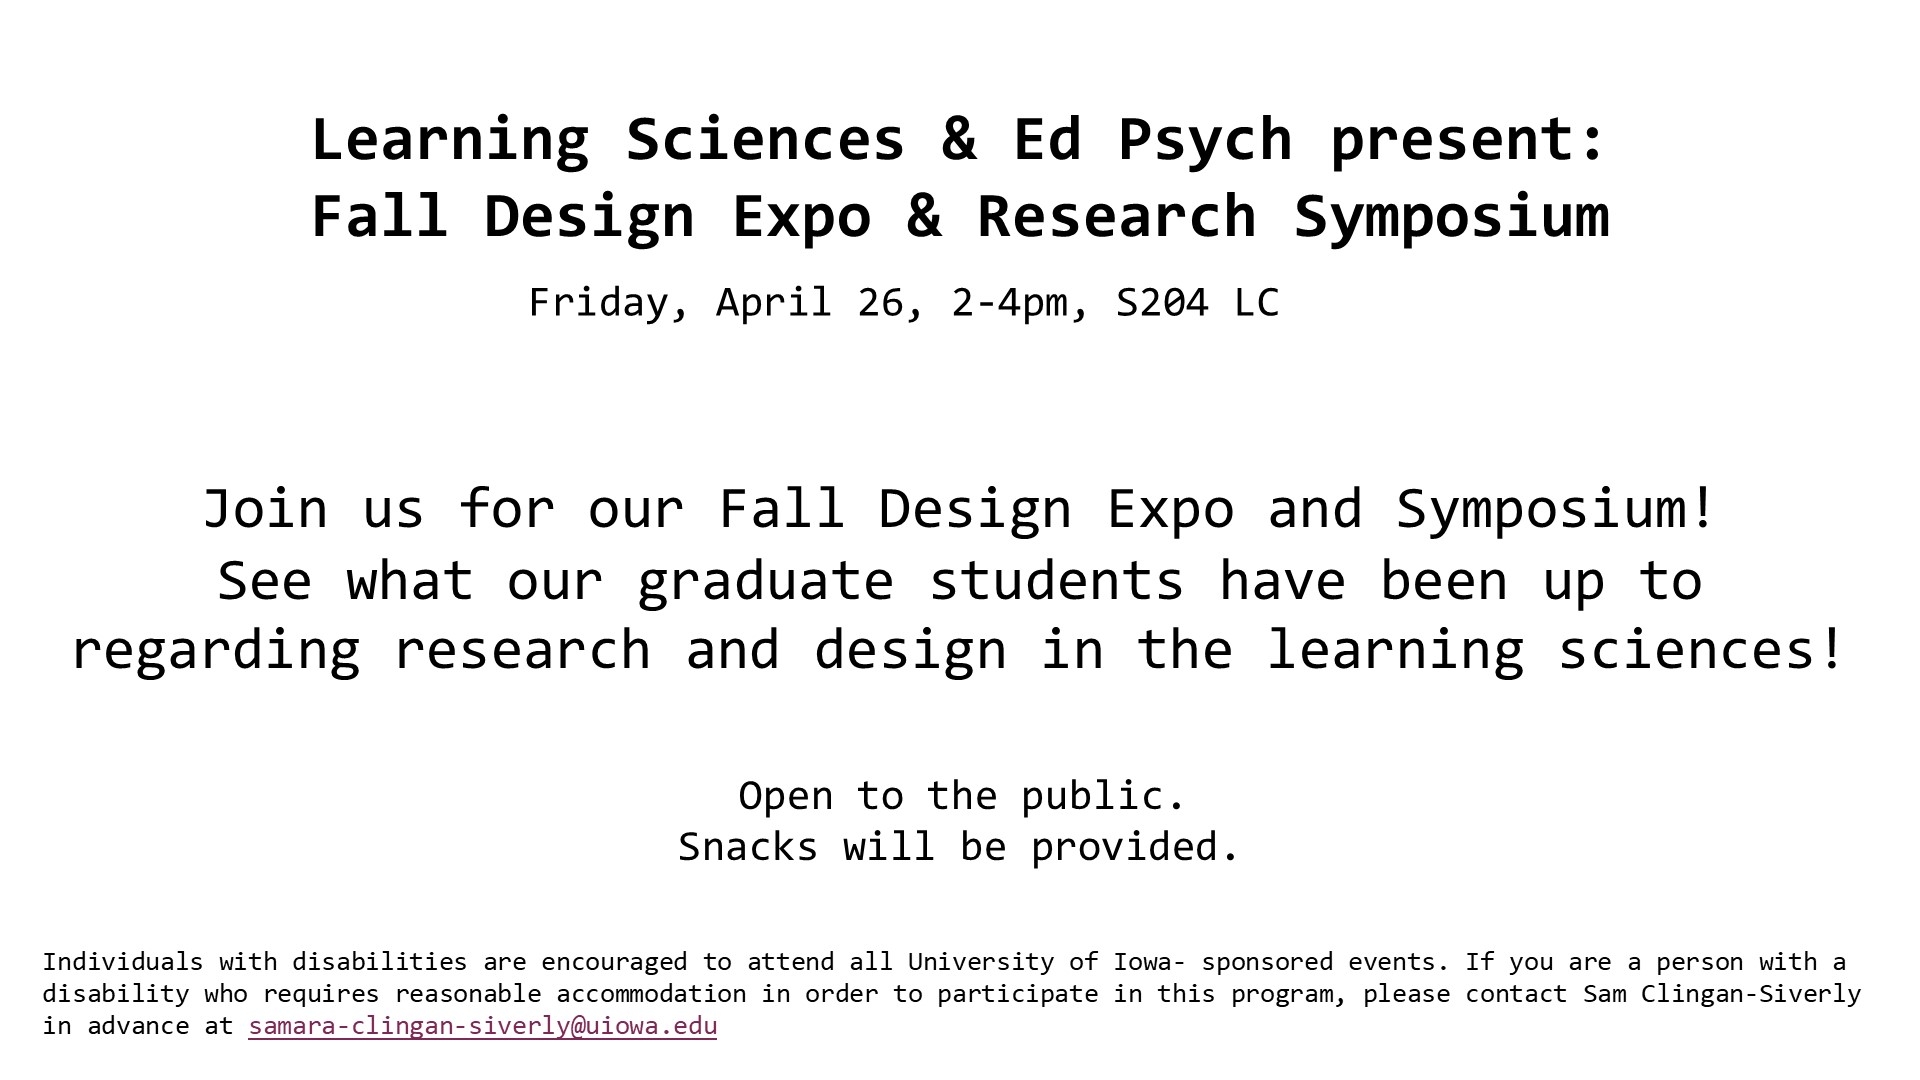 Learning Sciences & Ed Psych present: Fall Design Expo & Research Symposium. 4/26, 2-4p, S204 LC. Open to the public. Snacks will be provided.